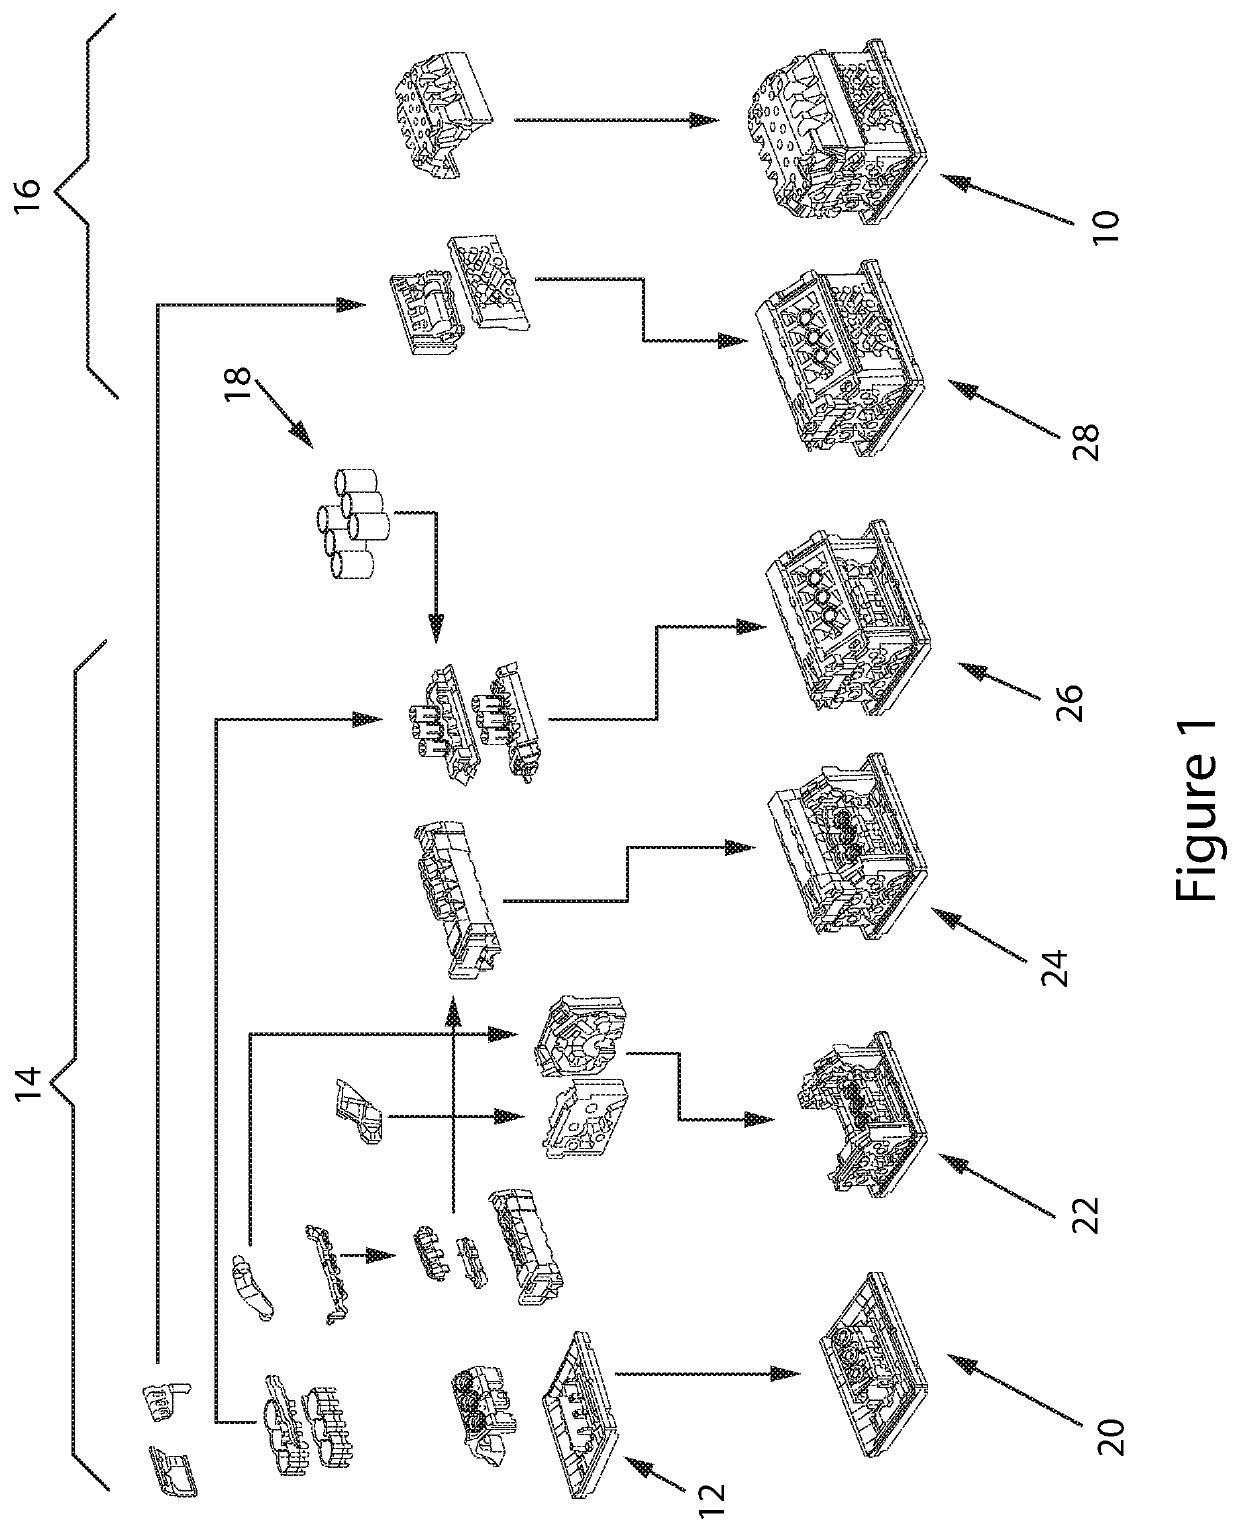 Automated assembly cell and assembly line for producing sand molds for foundries